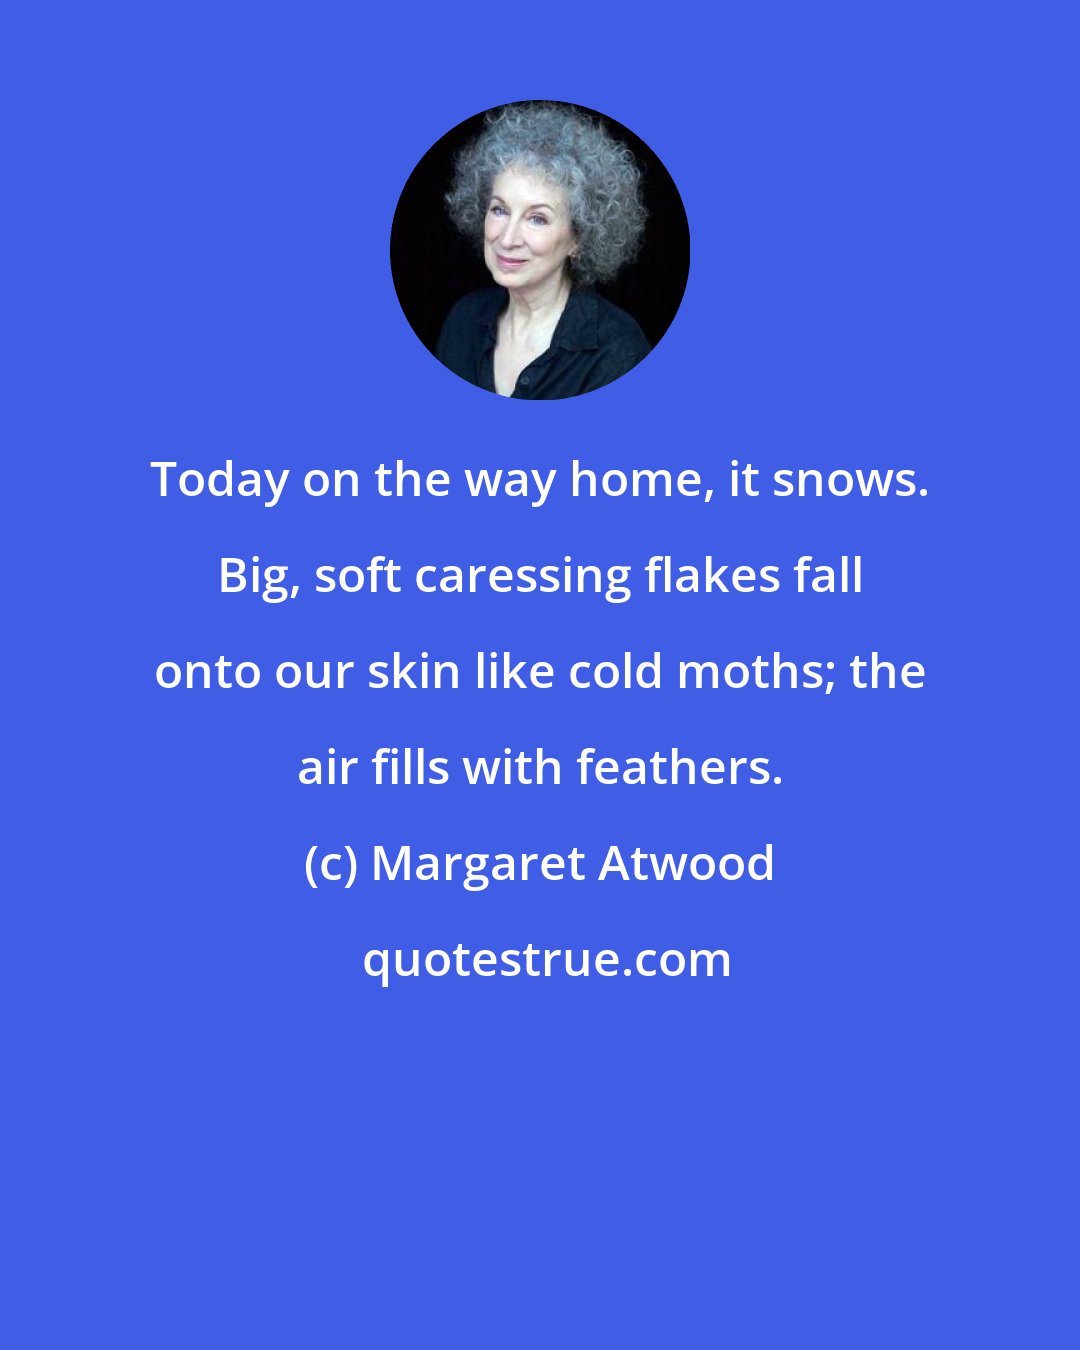 Margaret Atwood: Today on the way home, it snows. Big, soft caressing flakes fall onto our skin like cold moths; the air fills with feathers.